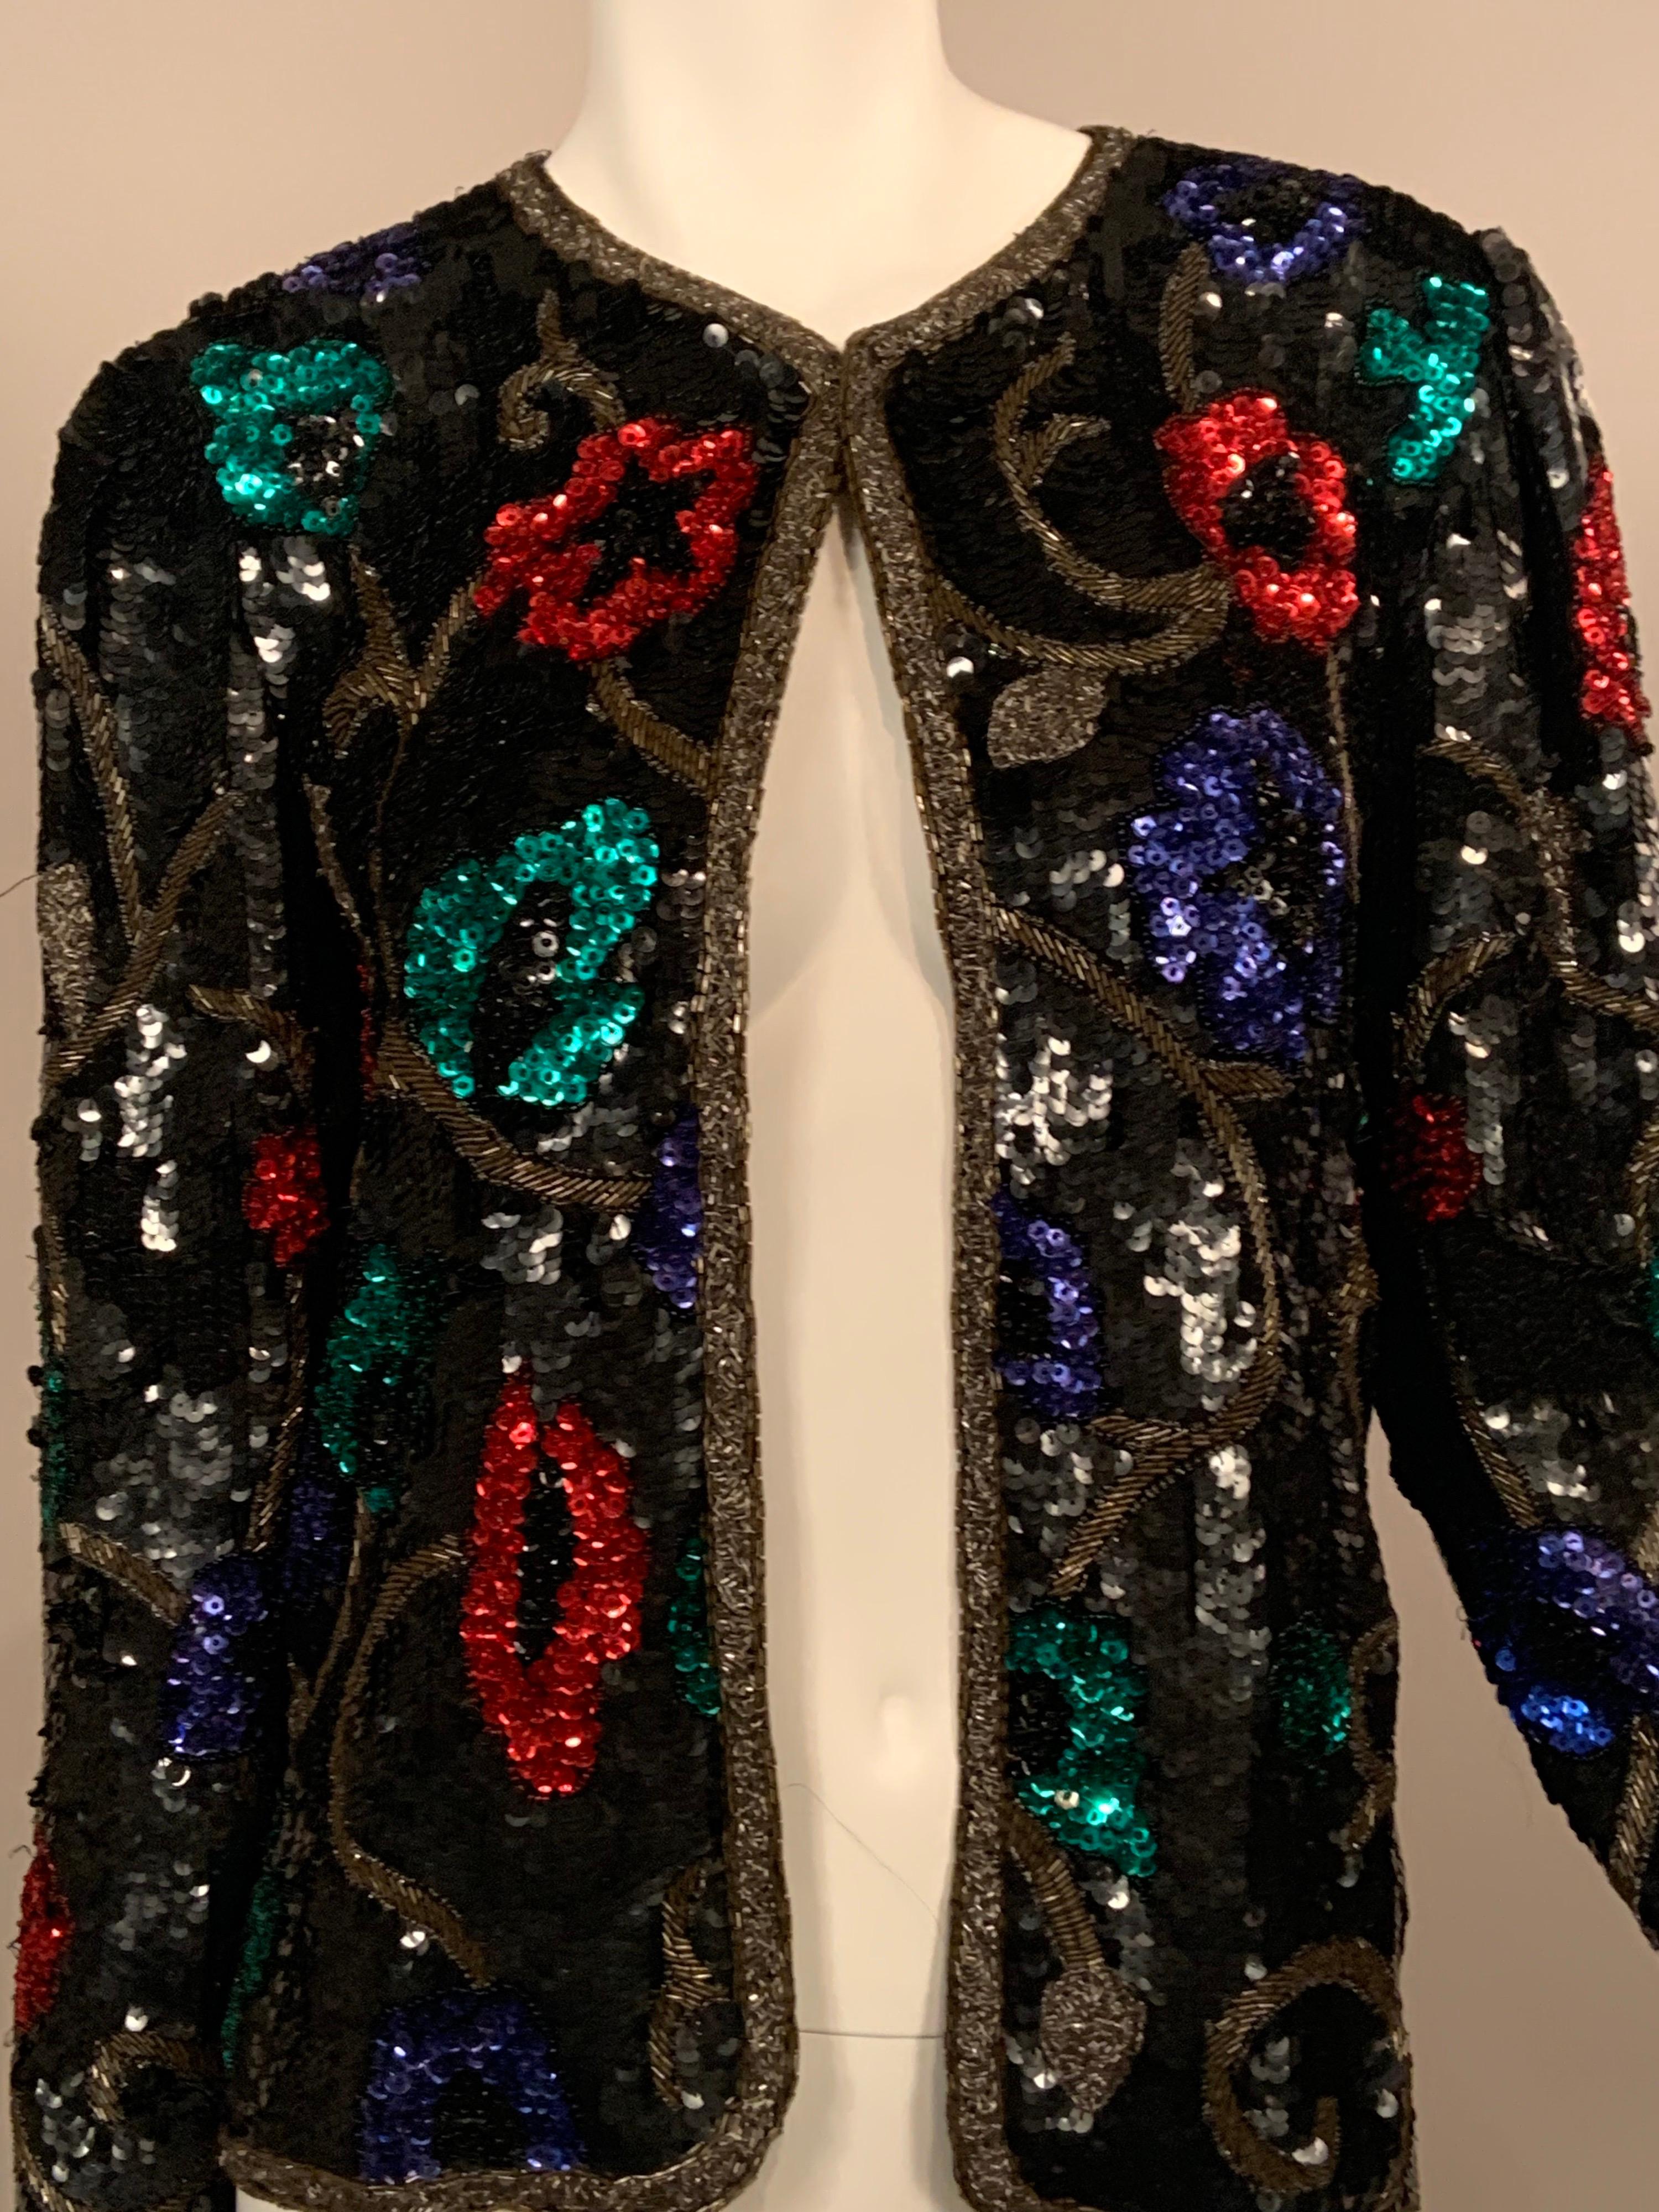 This vintage cardigan style jackt has a black sequin background and it is edged with silver and gold bugle beads.  The body of the jacket has red, blue and green sequin flowers with caviar beaded centers and edging.  These are on a meandering leaf